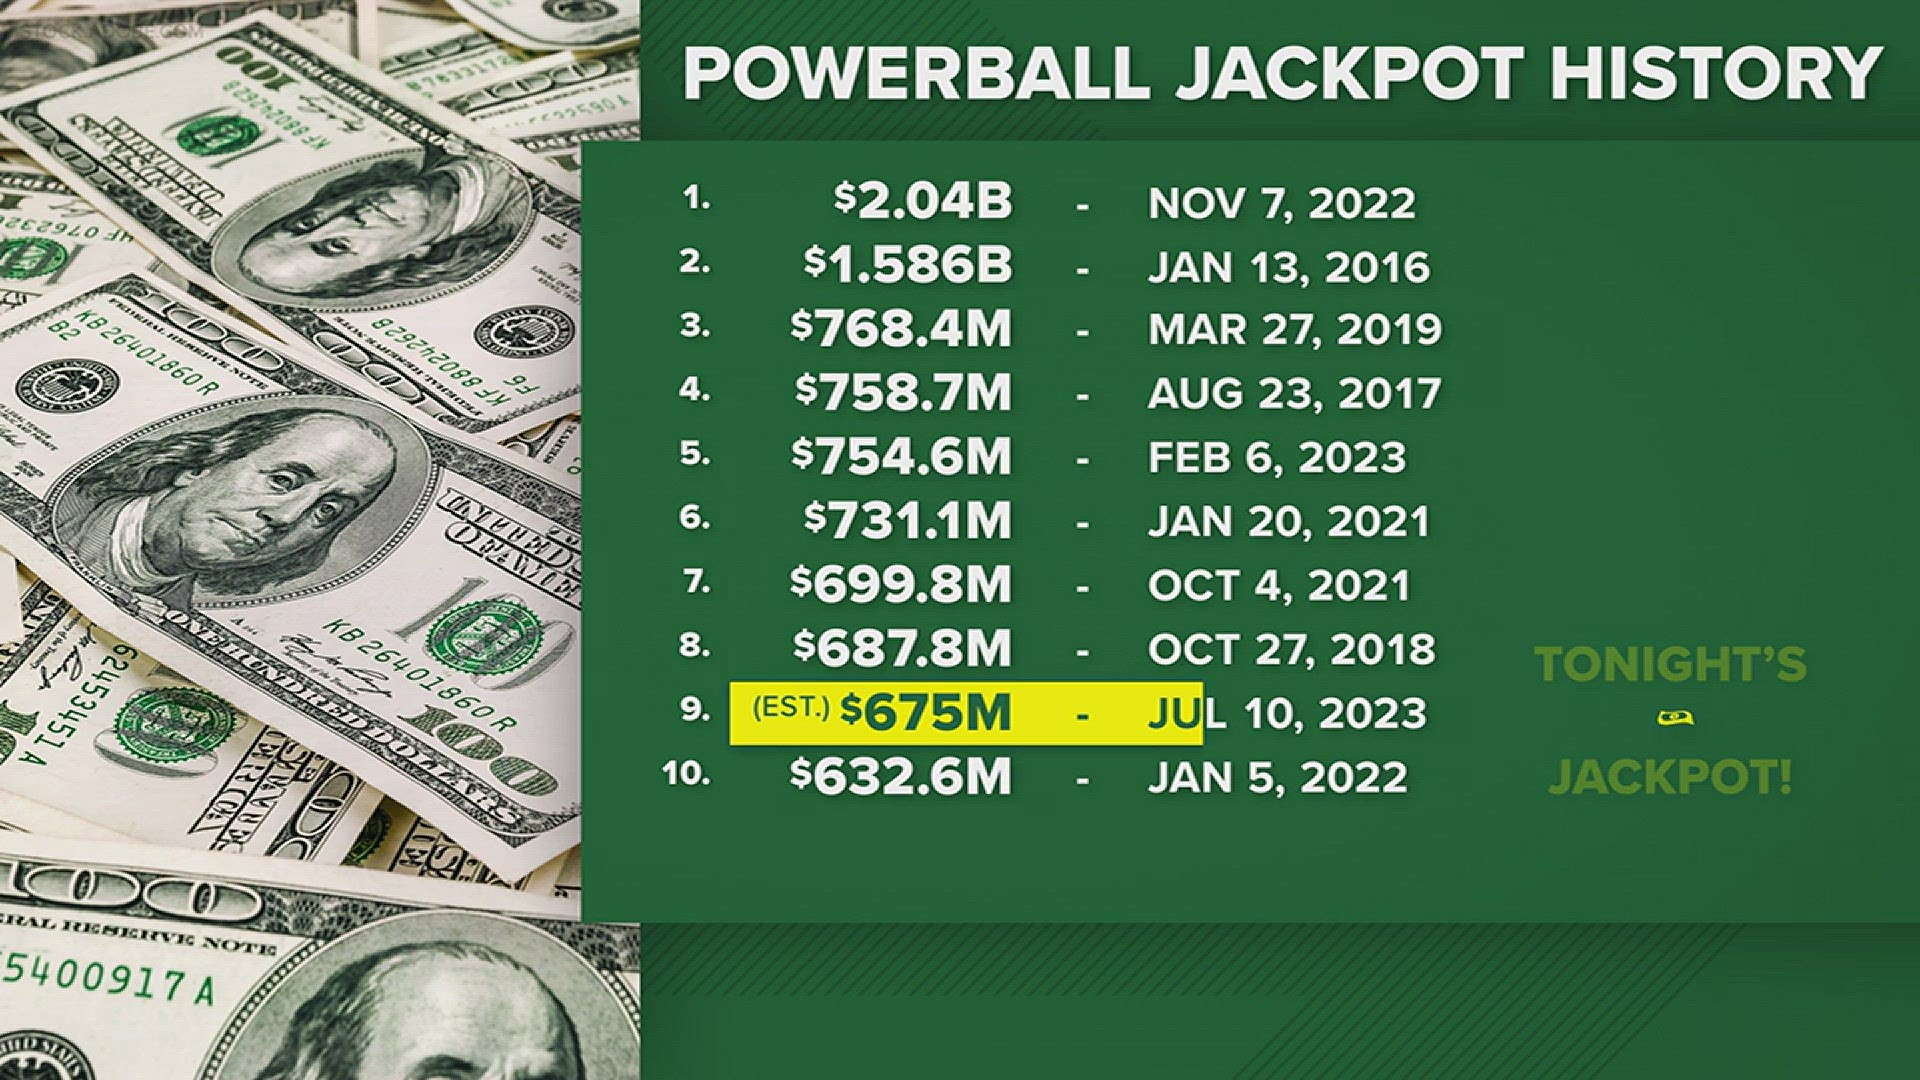 Tonight’s jackpot is now the ninth largest in Powerball history. The most ever won was just over 2 billion dollars back in November.